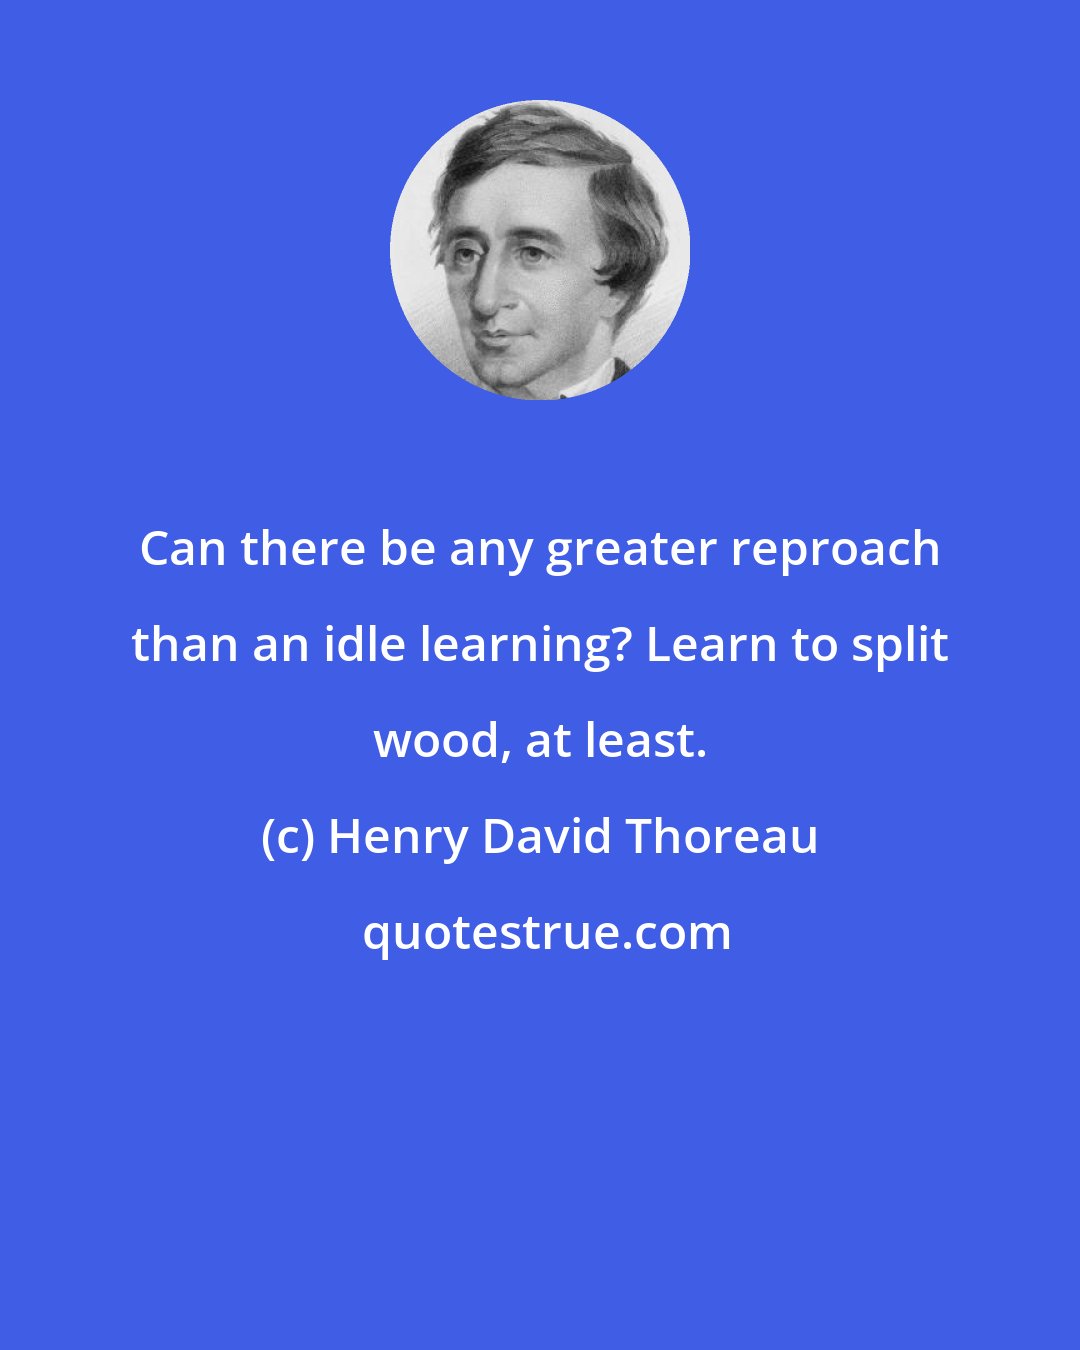 Henry David Thoreau: Can there be any greater reproach than an idle learning? Learn to split wood, at least.